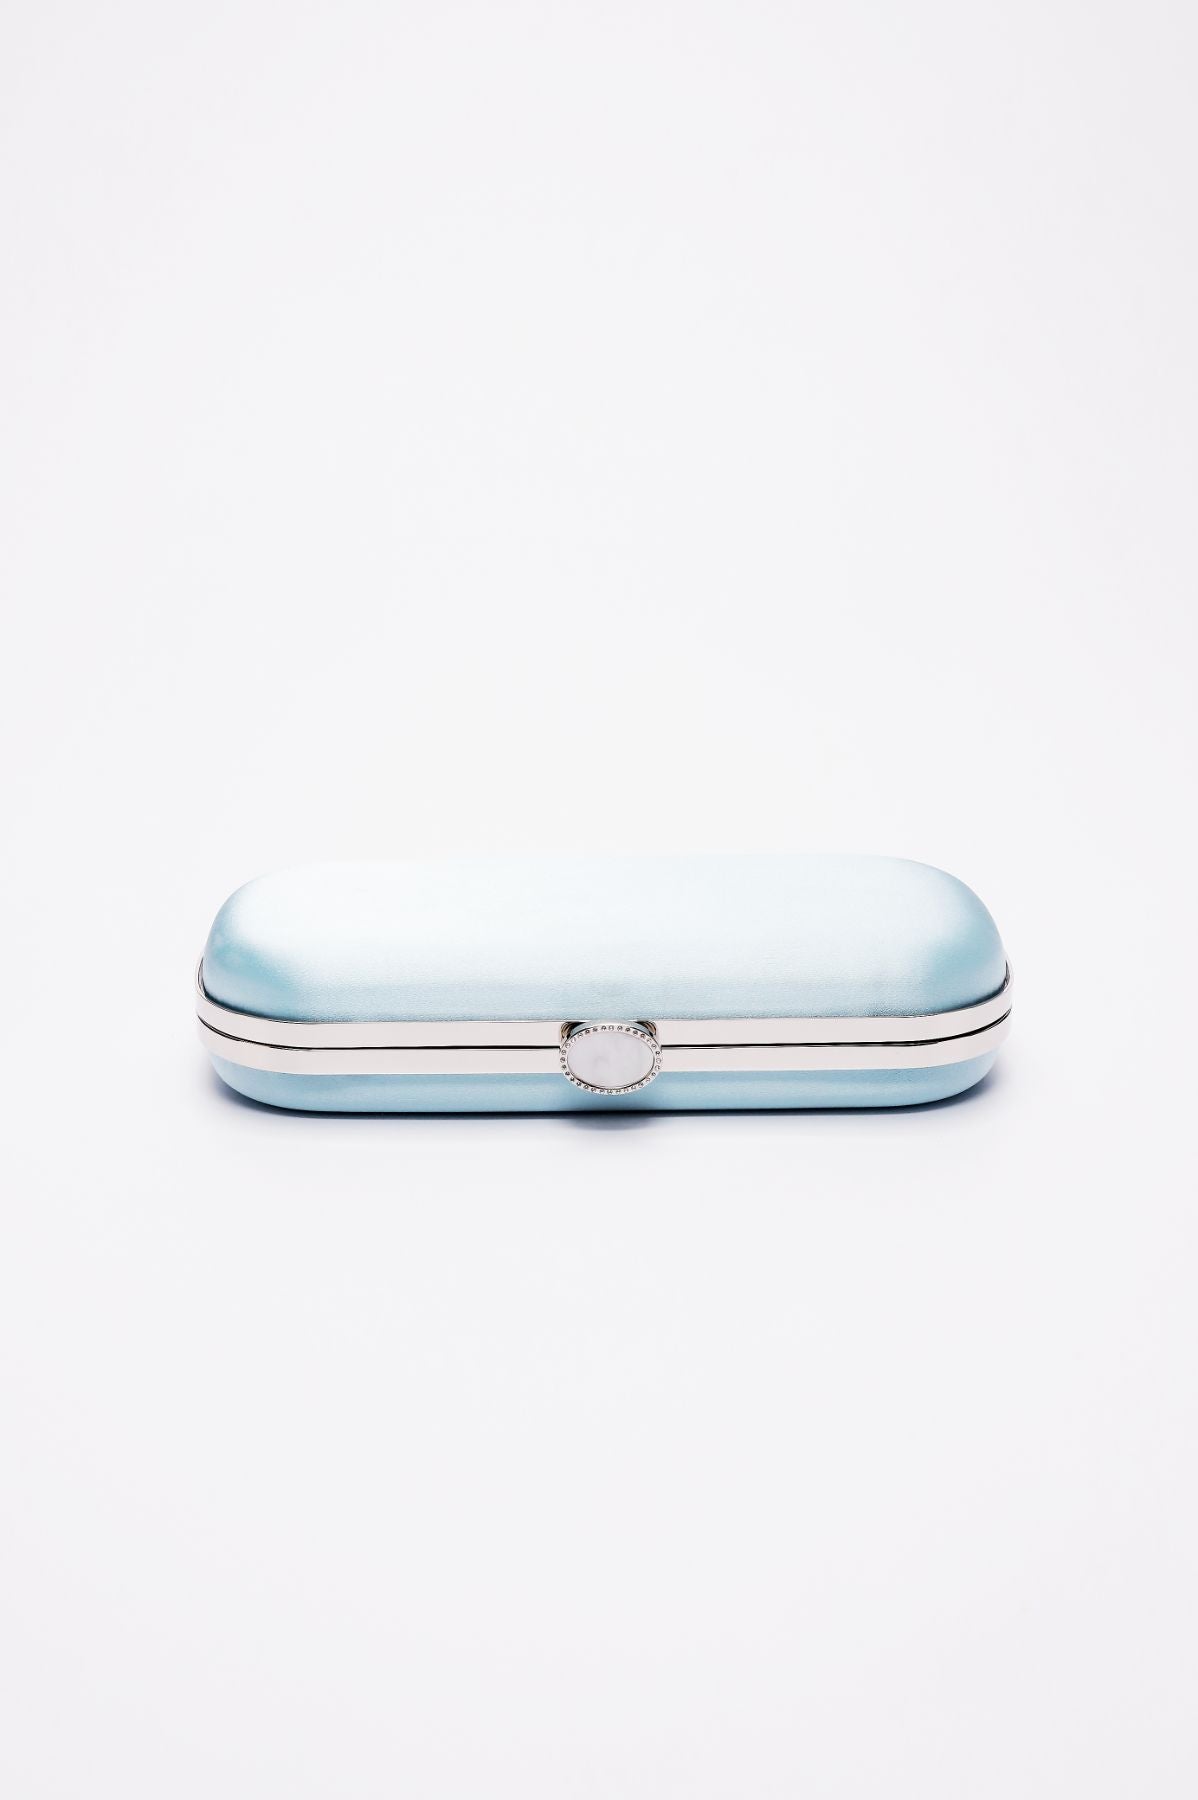 A light blue The Bella Rosa Collection eyeglass case with a Bella Clutch Cinderella Blue Petite design closed and centered against a white background.